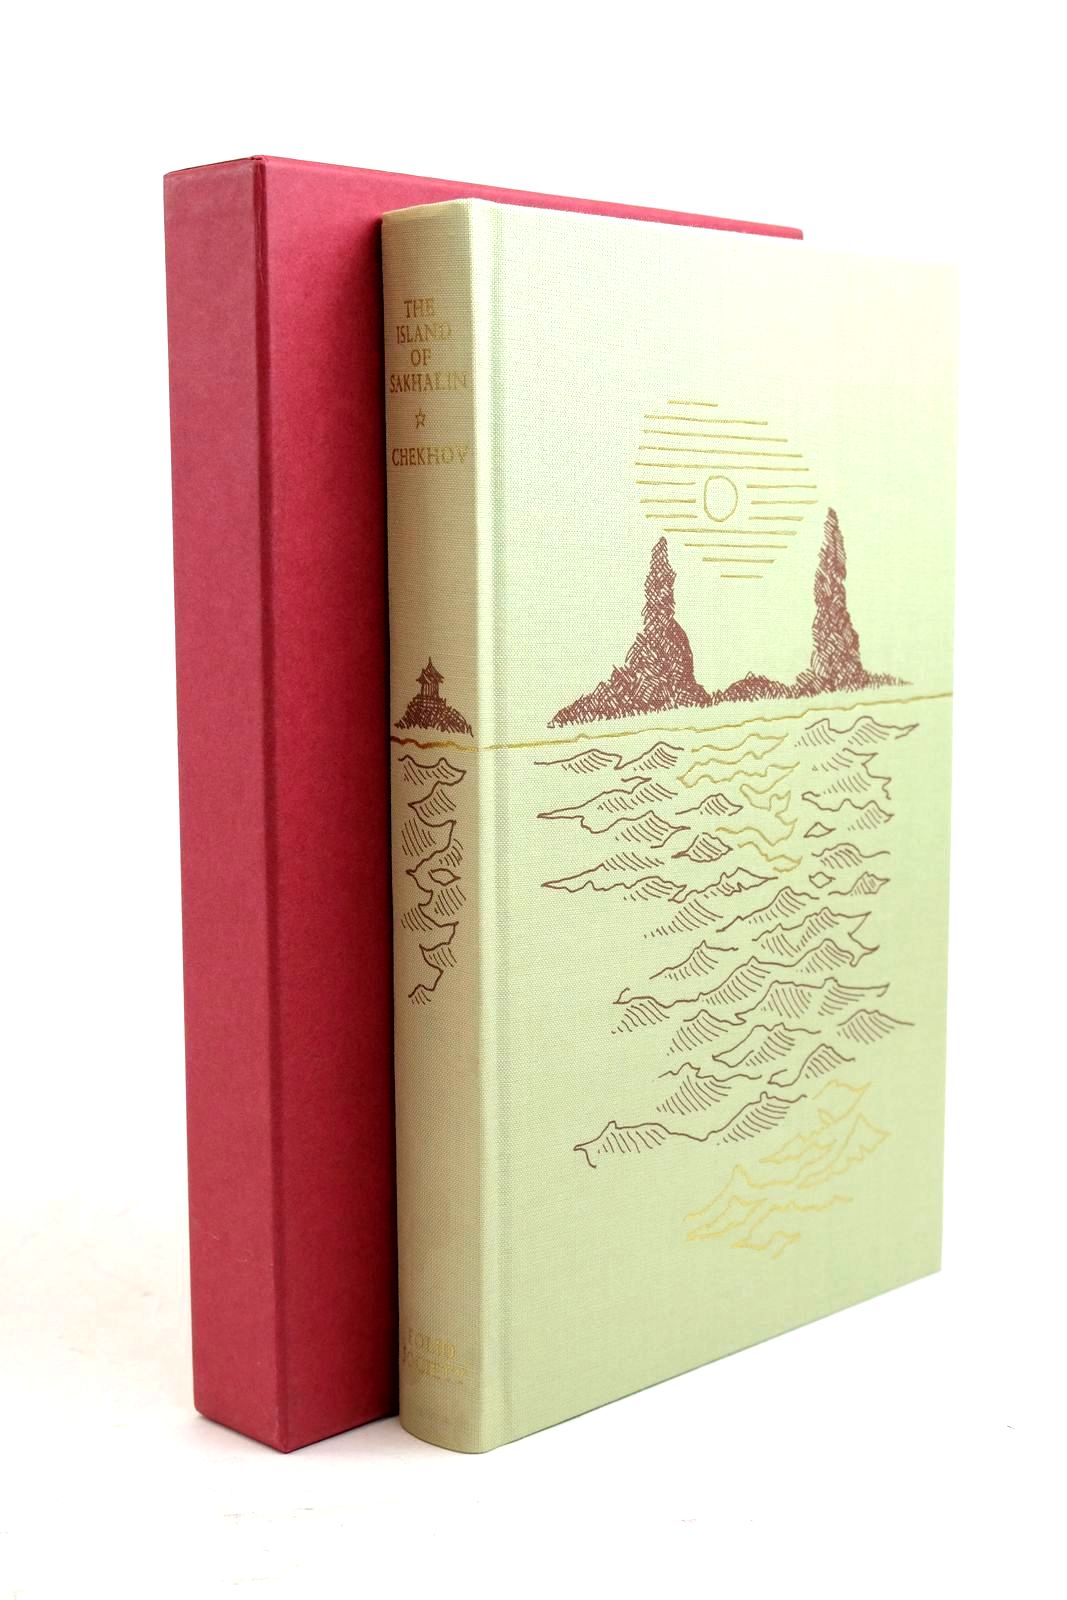 Photo of THE ISLAND OF SAKHALIN written by Chekhov, Anton published by Folio Society (STOCK CODE: 1321268)  for sale by Stella & Rose's Books